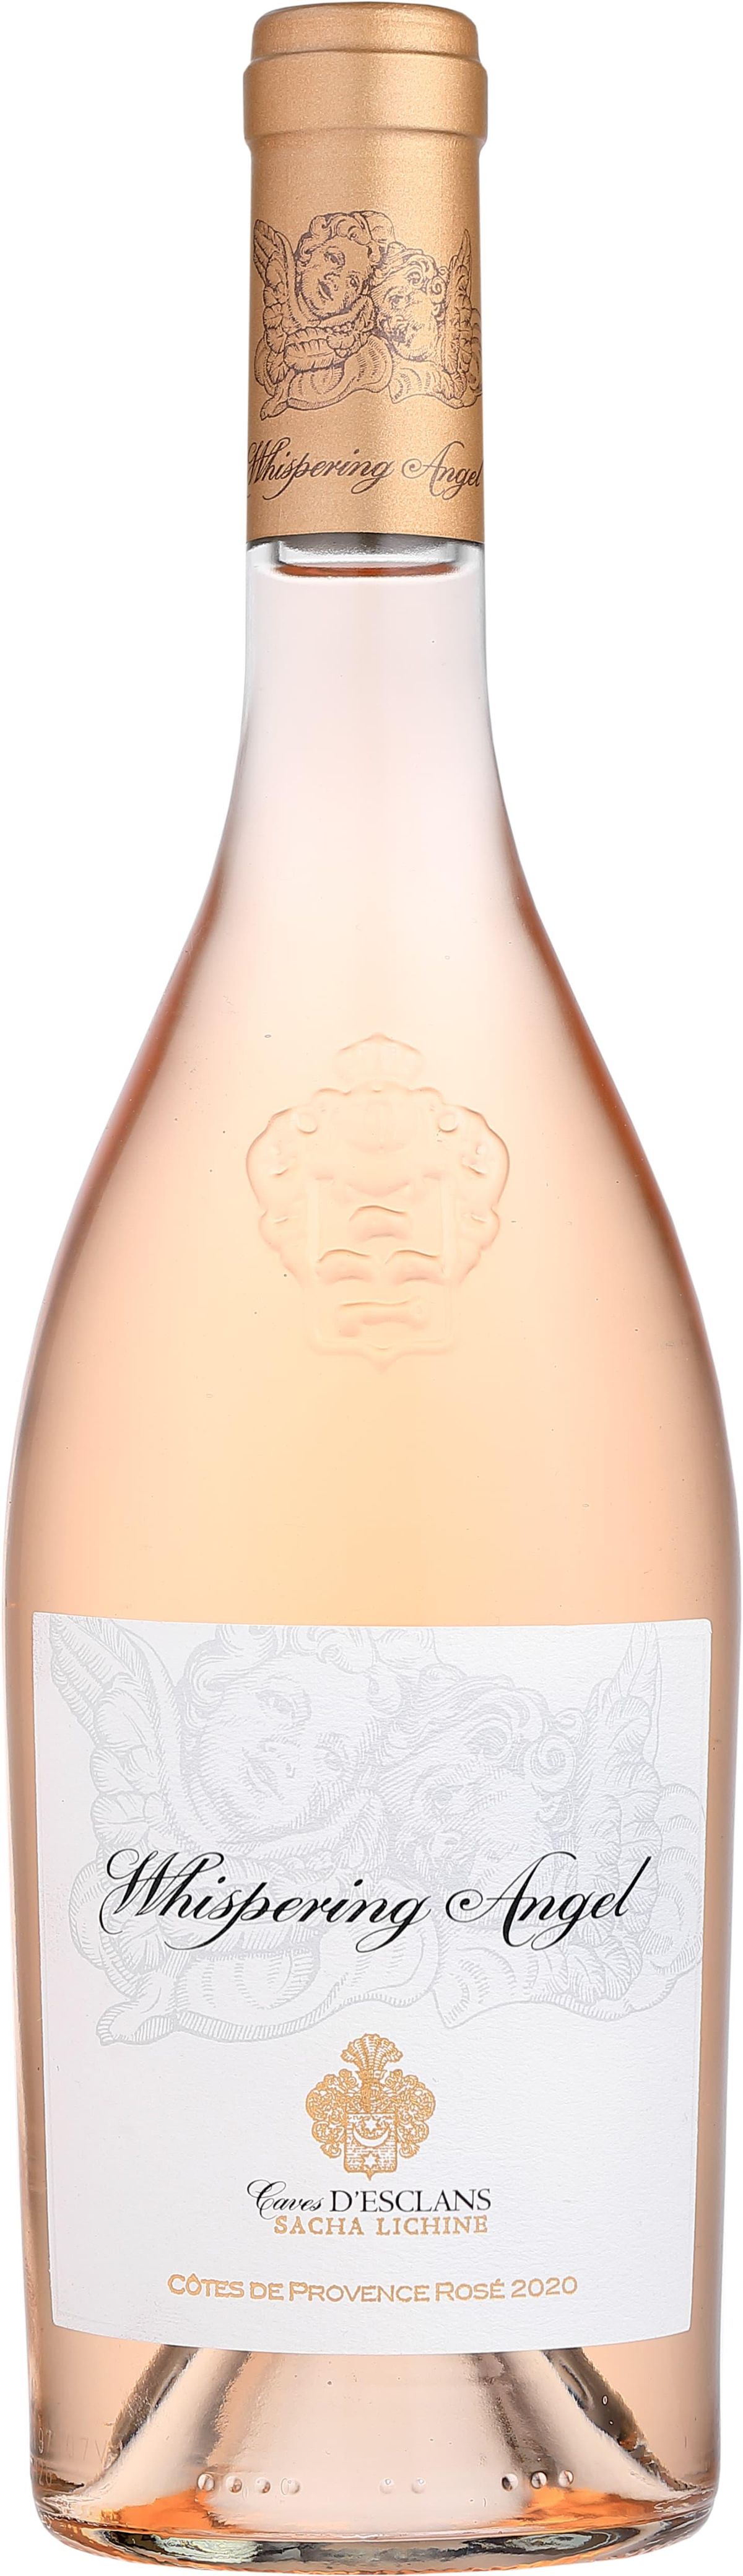 chateau d esclans whispering angel rose 2020